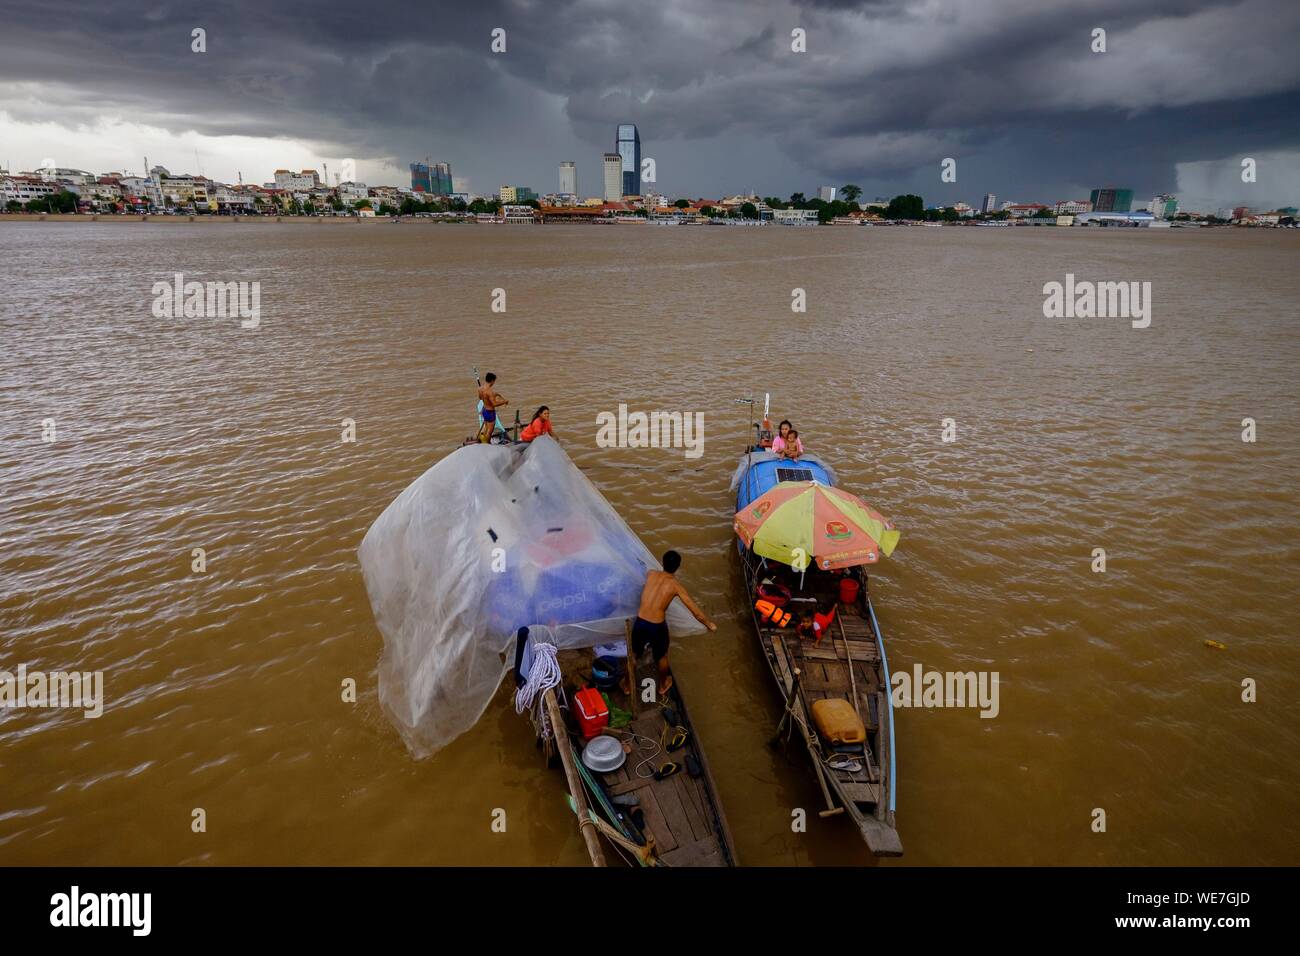 Cambodia, Phnom Penh, Cham ethnic group people living on their boats Stock Photo